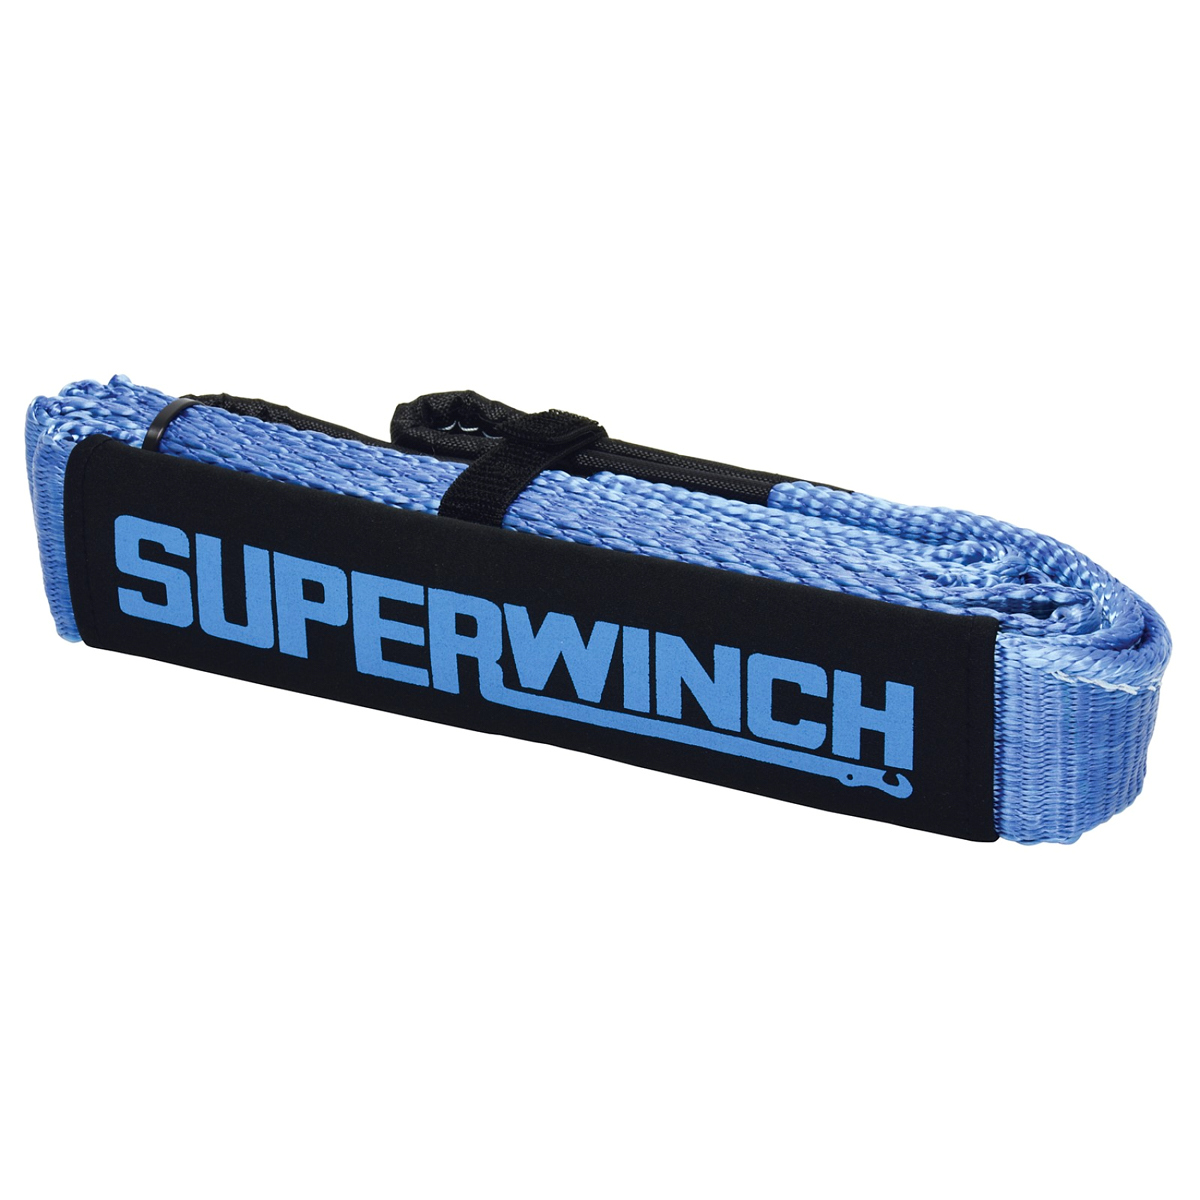 SuperWinch 2588 Tree Trunk Protector, 2 in Wide, 8 ft Long, 20000 lb Capacity, Nylon, Blue, Each